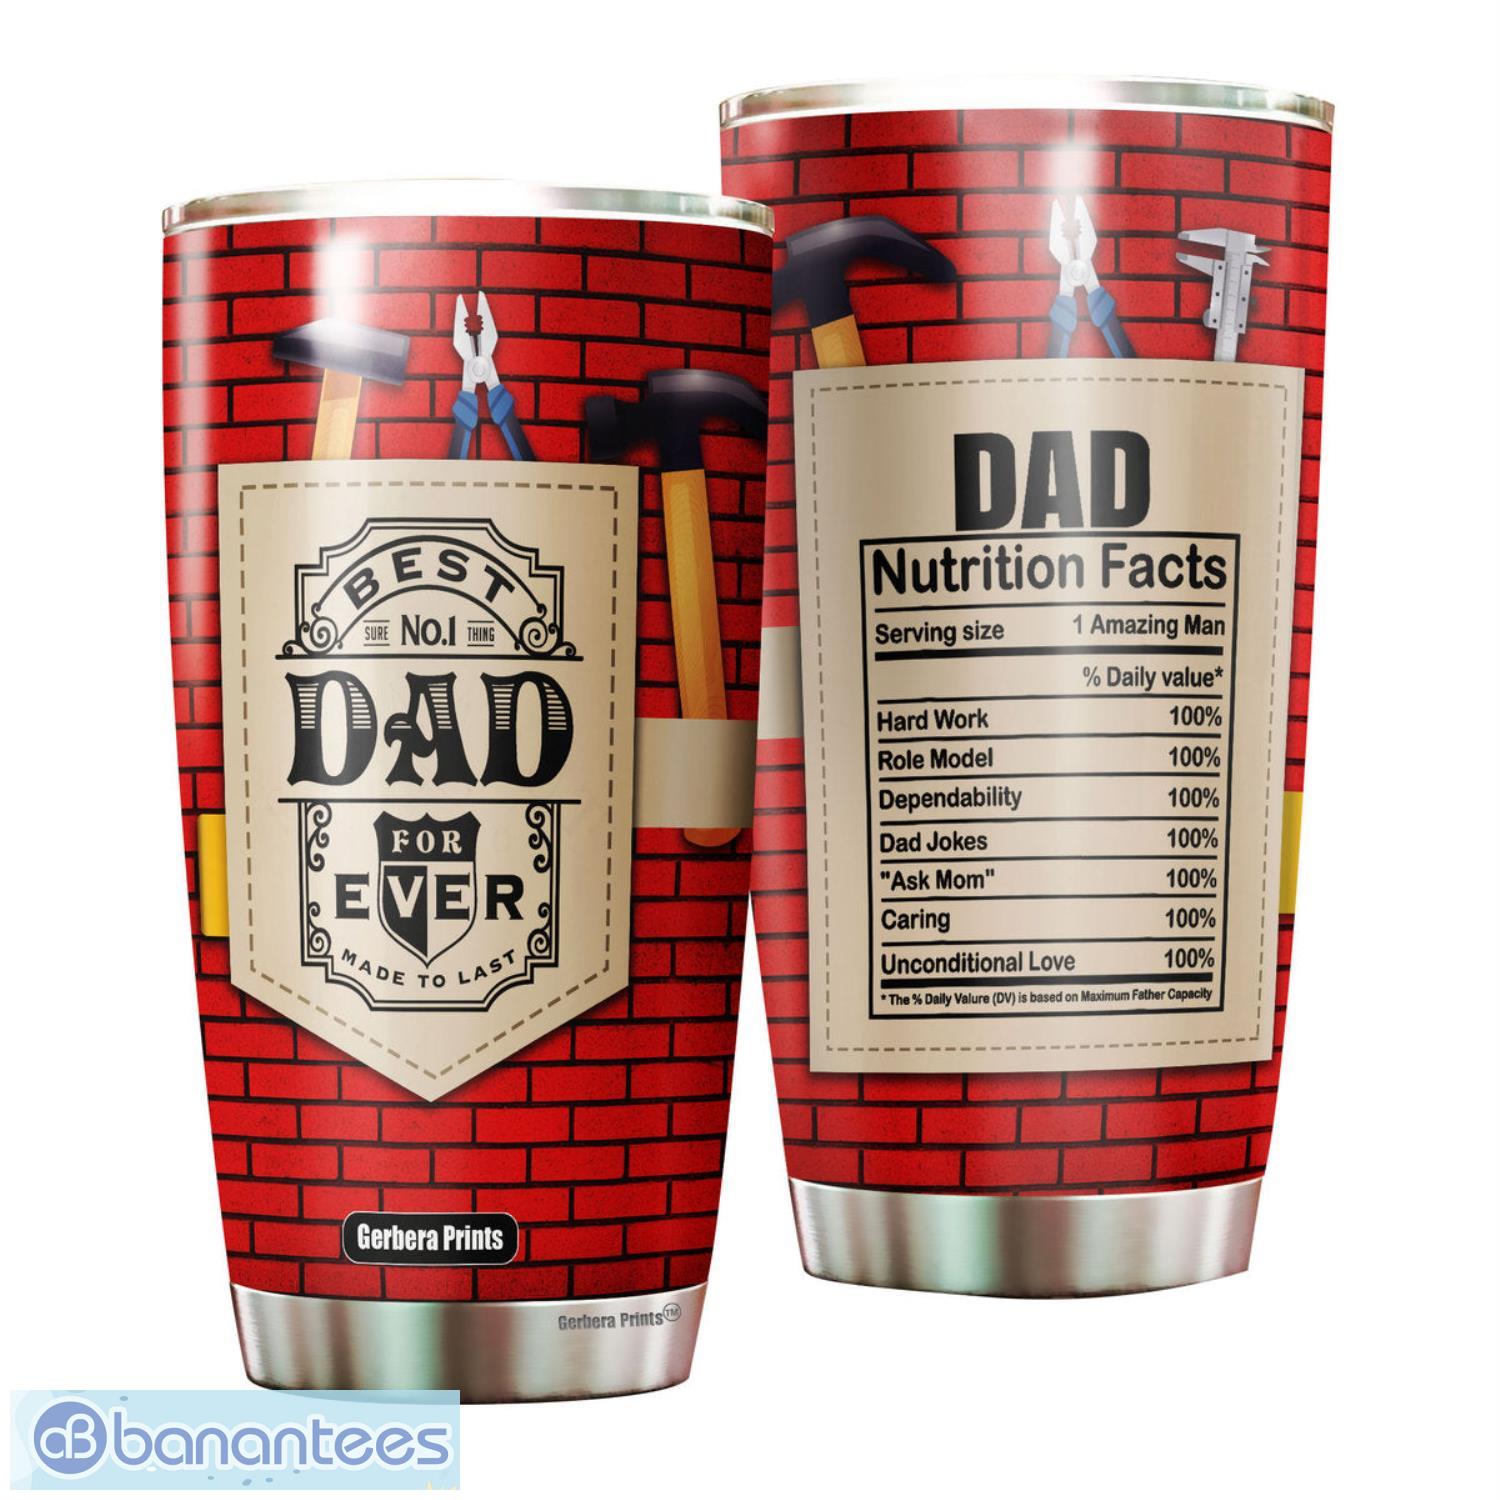 https://image.banantees.com/2023/05/fathers-day-best-brickmason-dad-ever-nutrition-facts-red-stainless-steel-tumbler-gift-for-dad.jpg